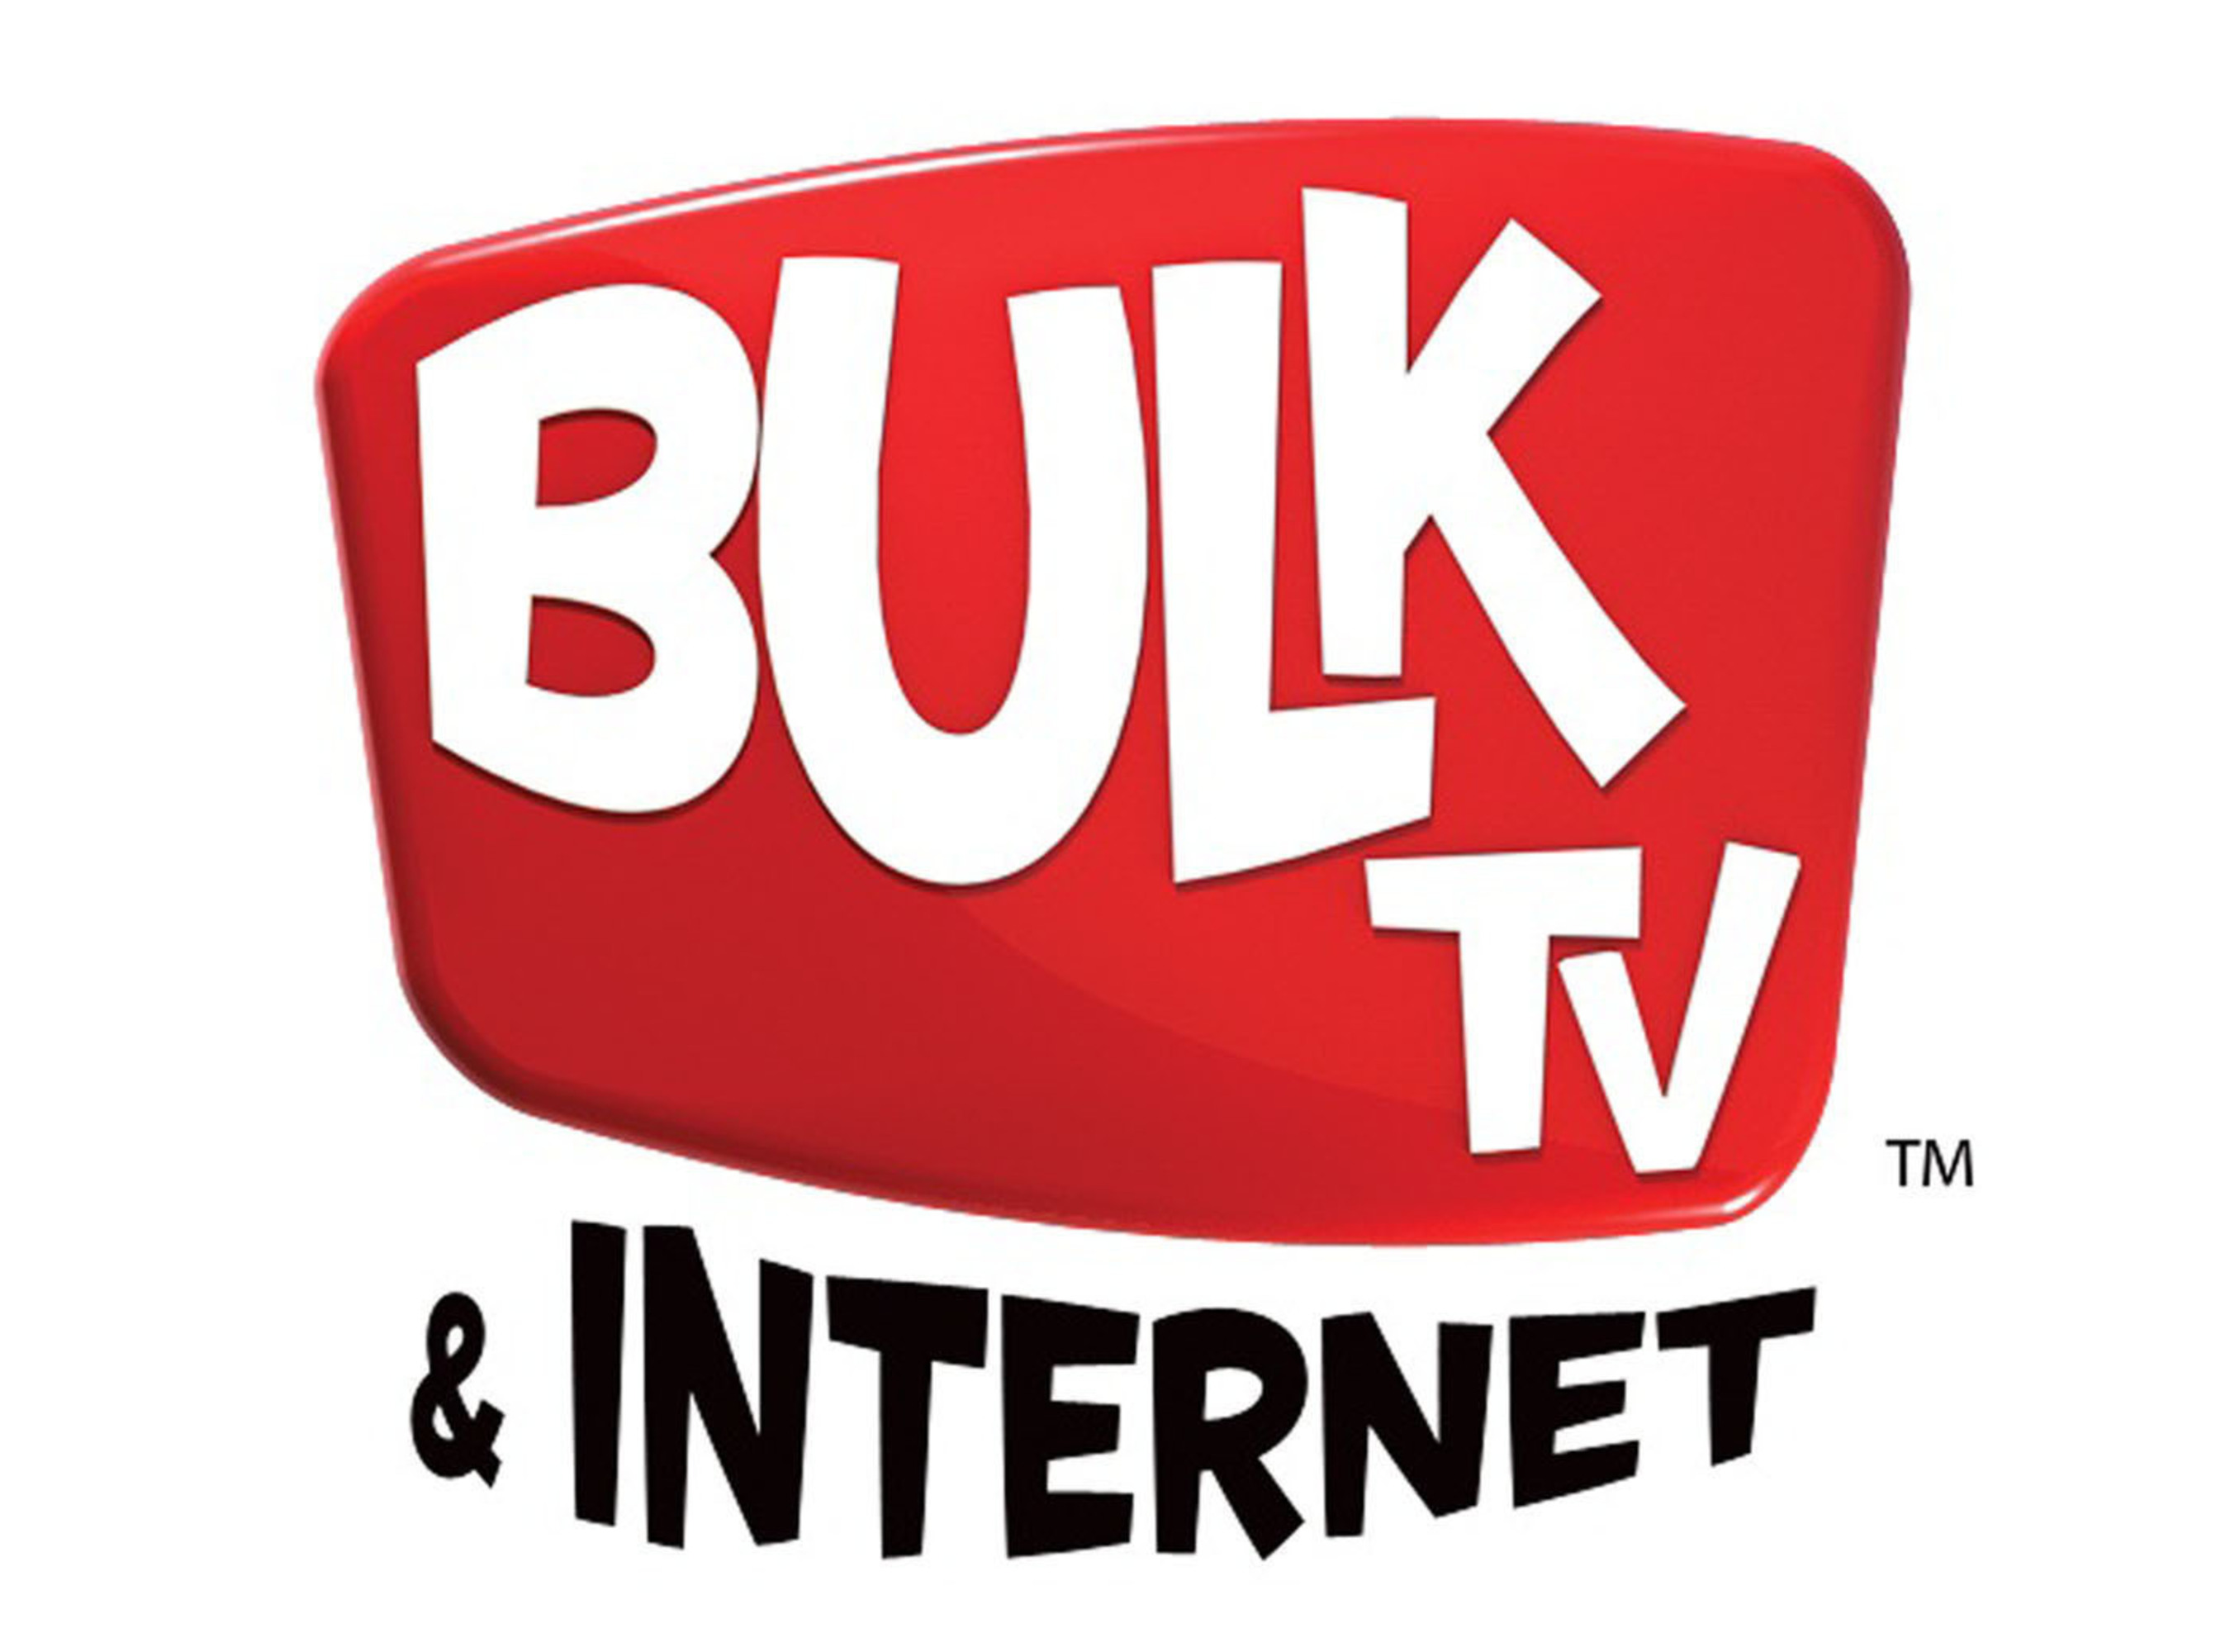 Bulk TV & Internet provides free-to-guest television services to businesses nationwide. (PRNewsFoto/Bulk TV & Internet) (PRNewsFoto/)